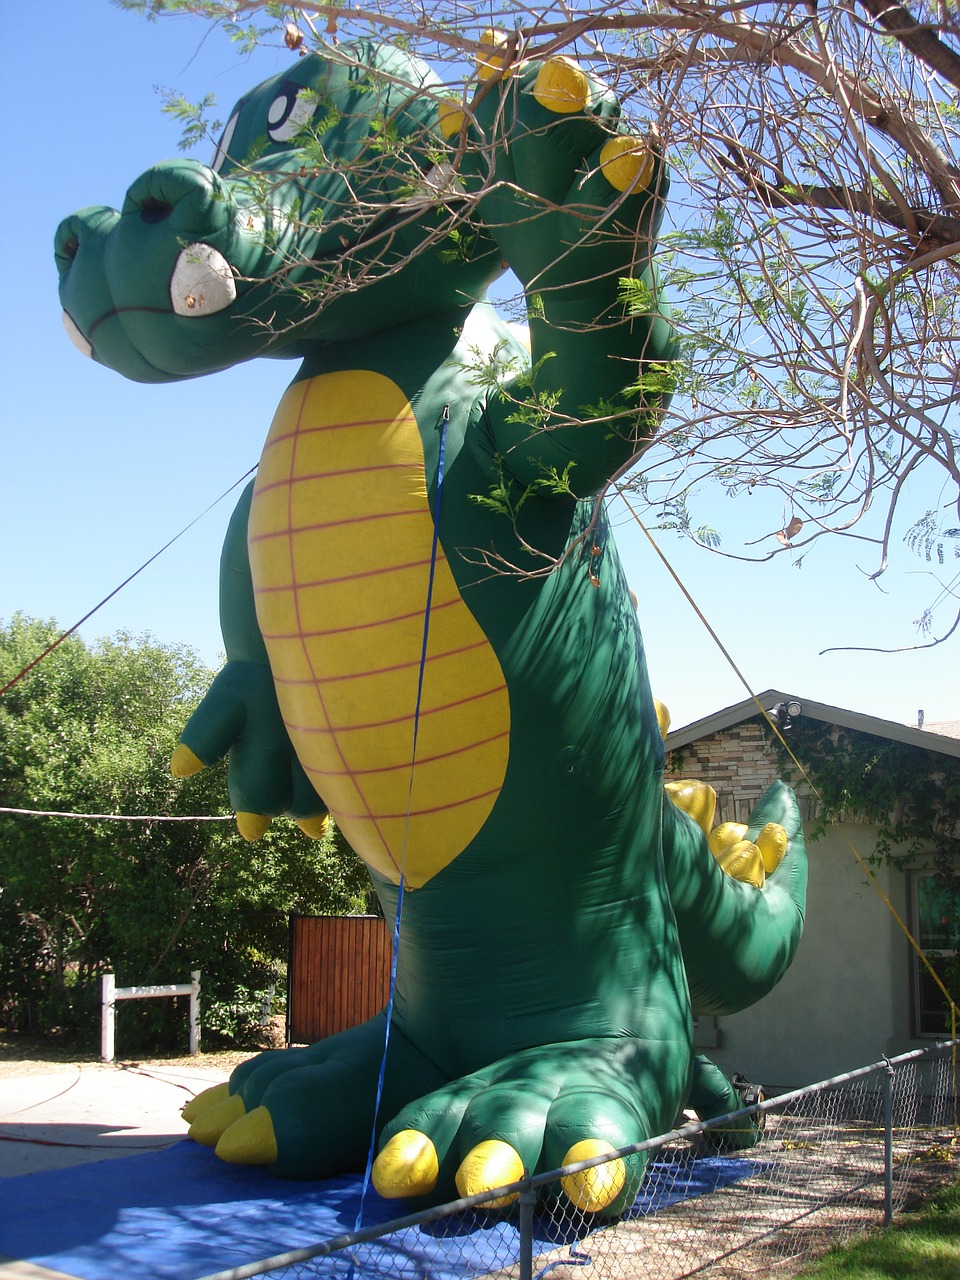 advertising inflatables giant inflatables alligator inflatables free photo